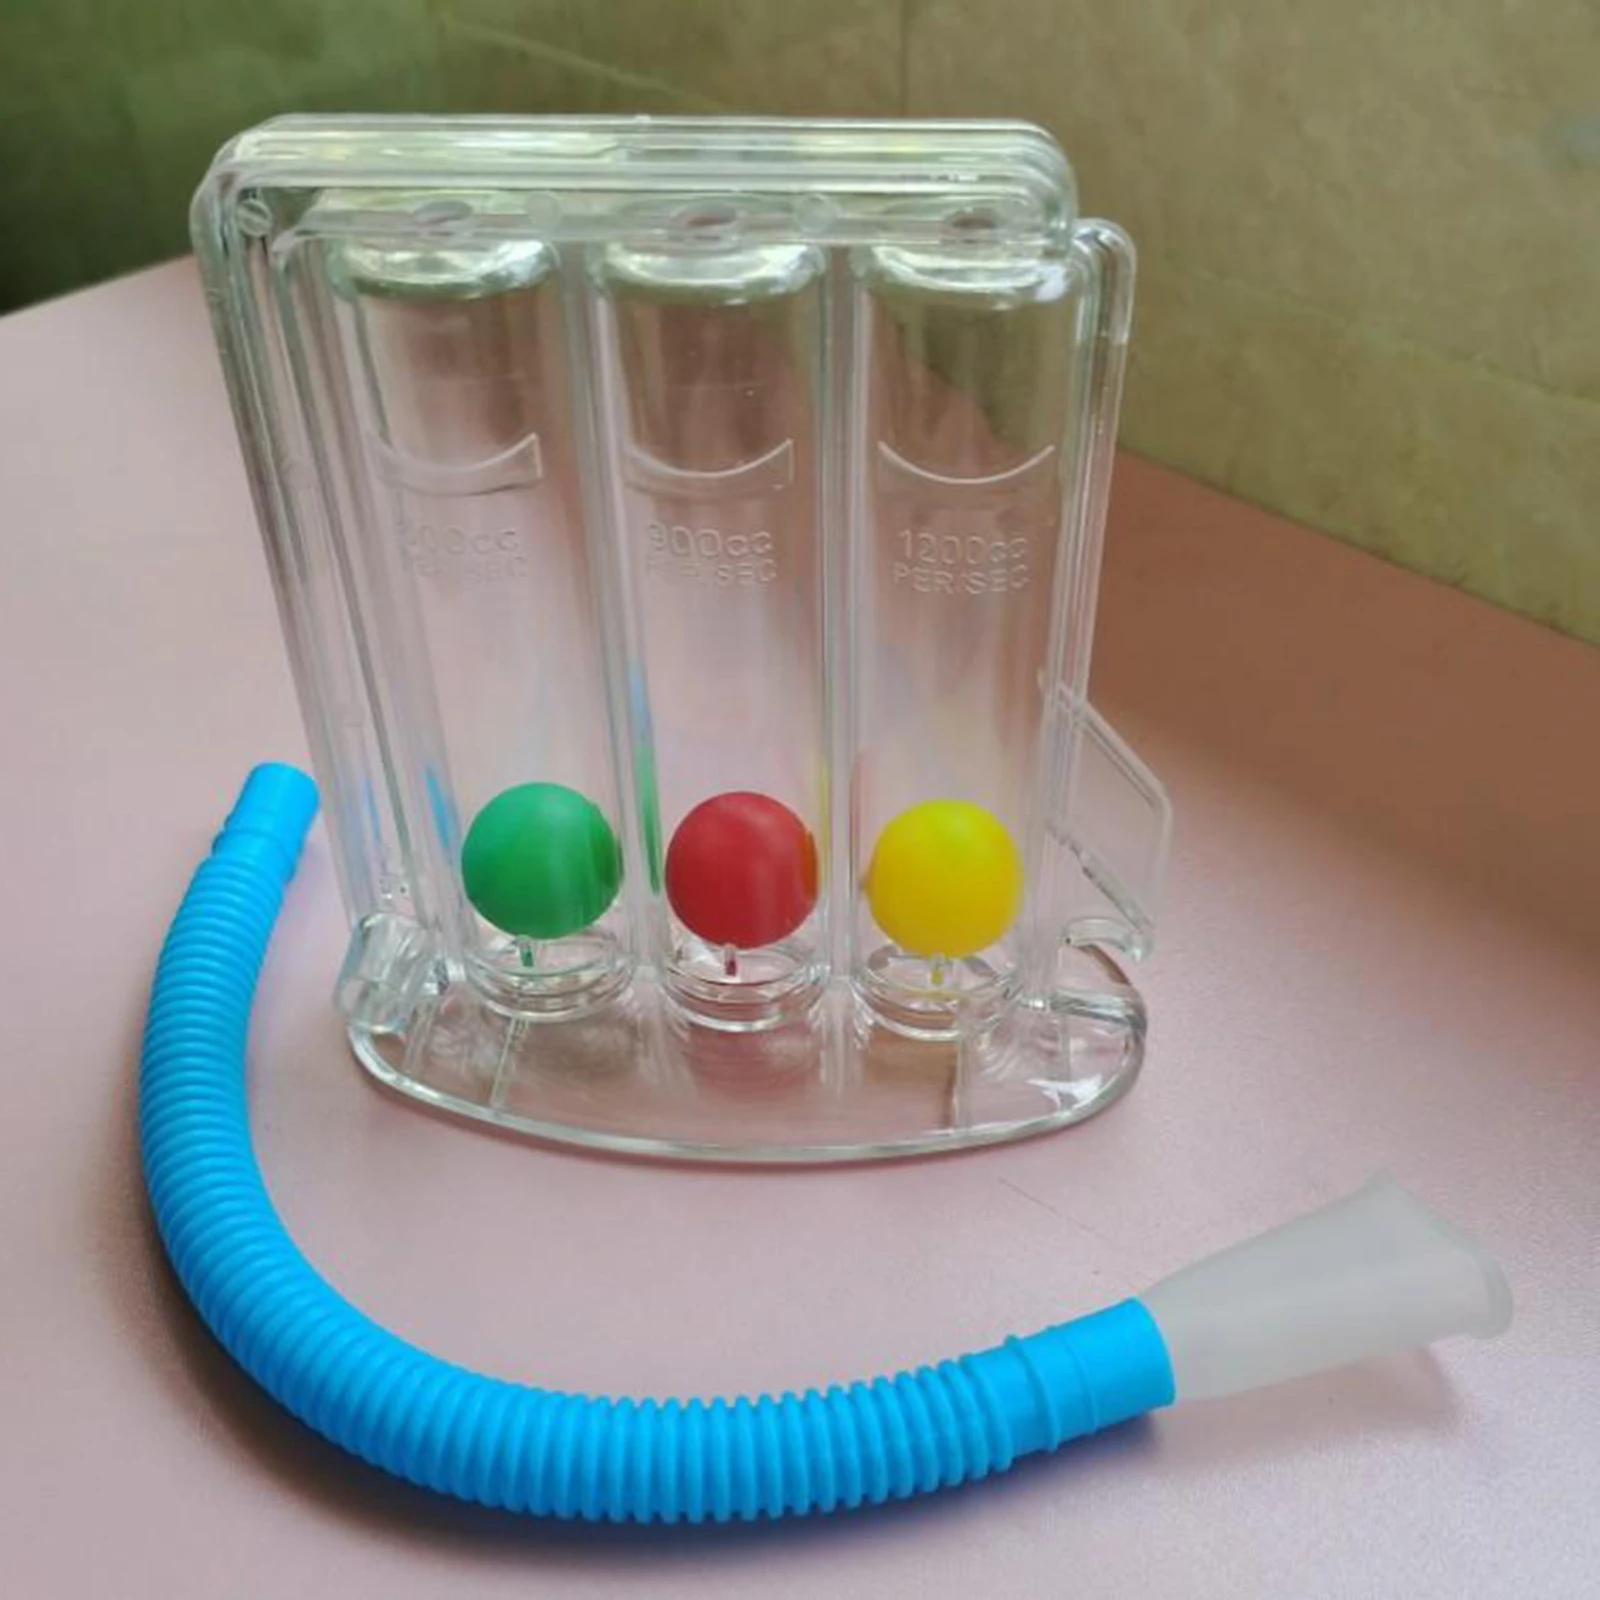 Three-ball Breathing Trainer Incentive Spirometer Lung Breathing Exerciser